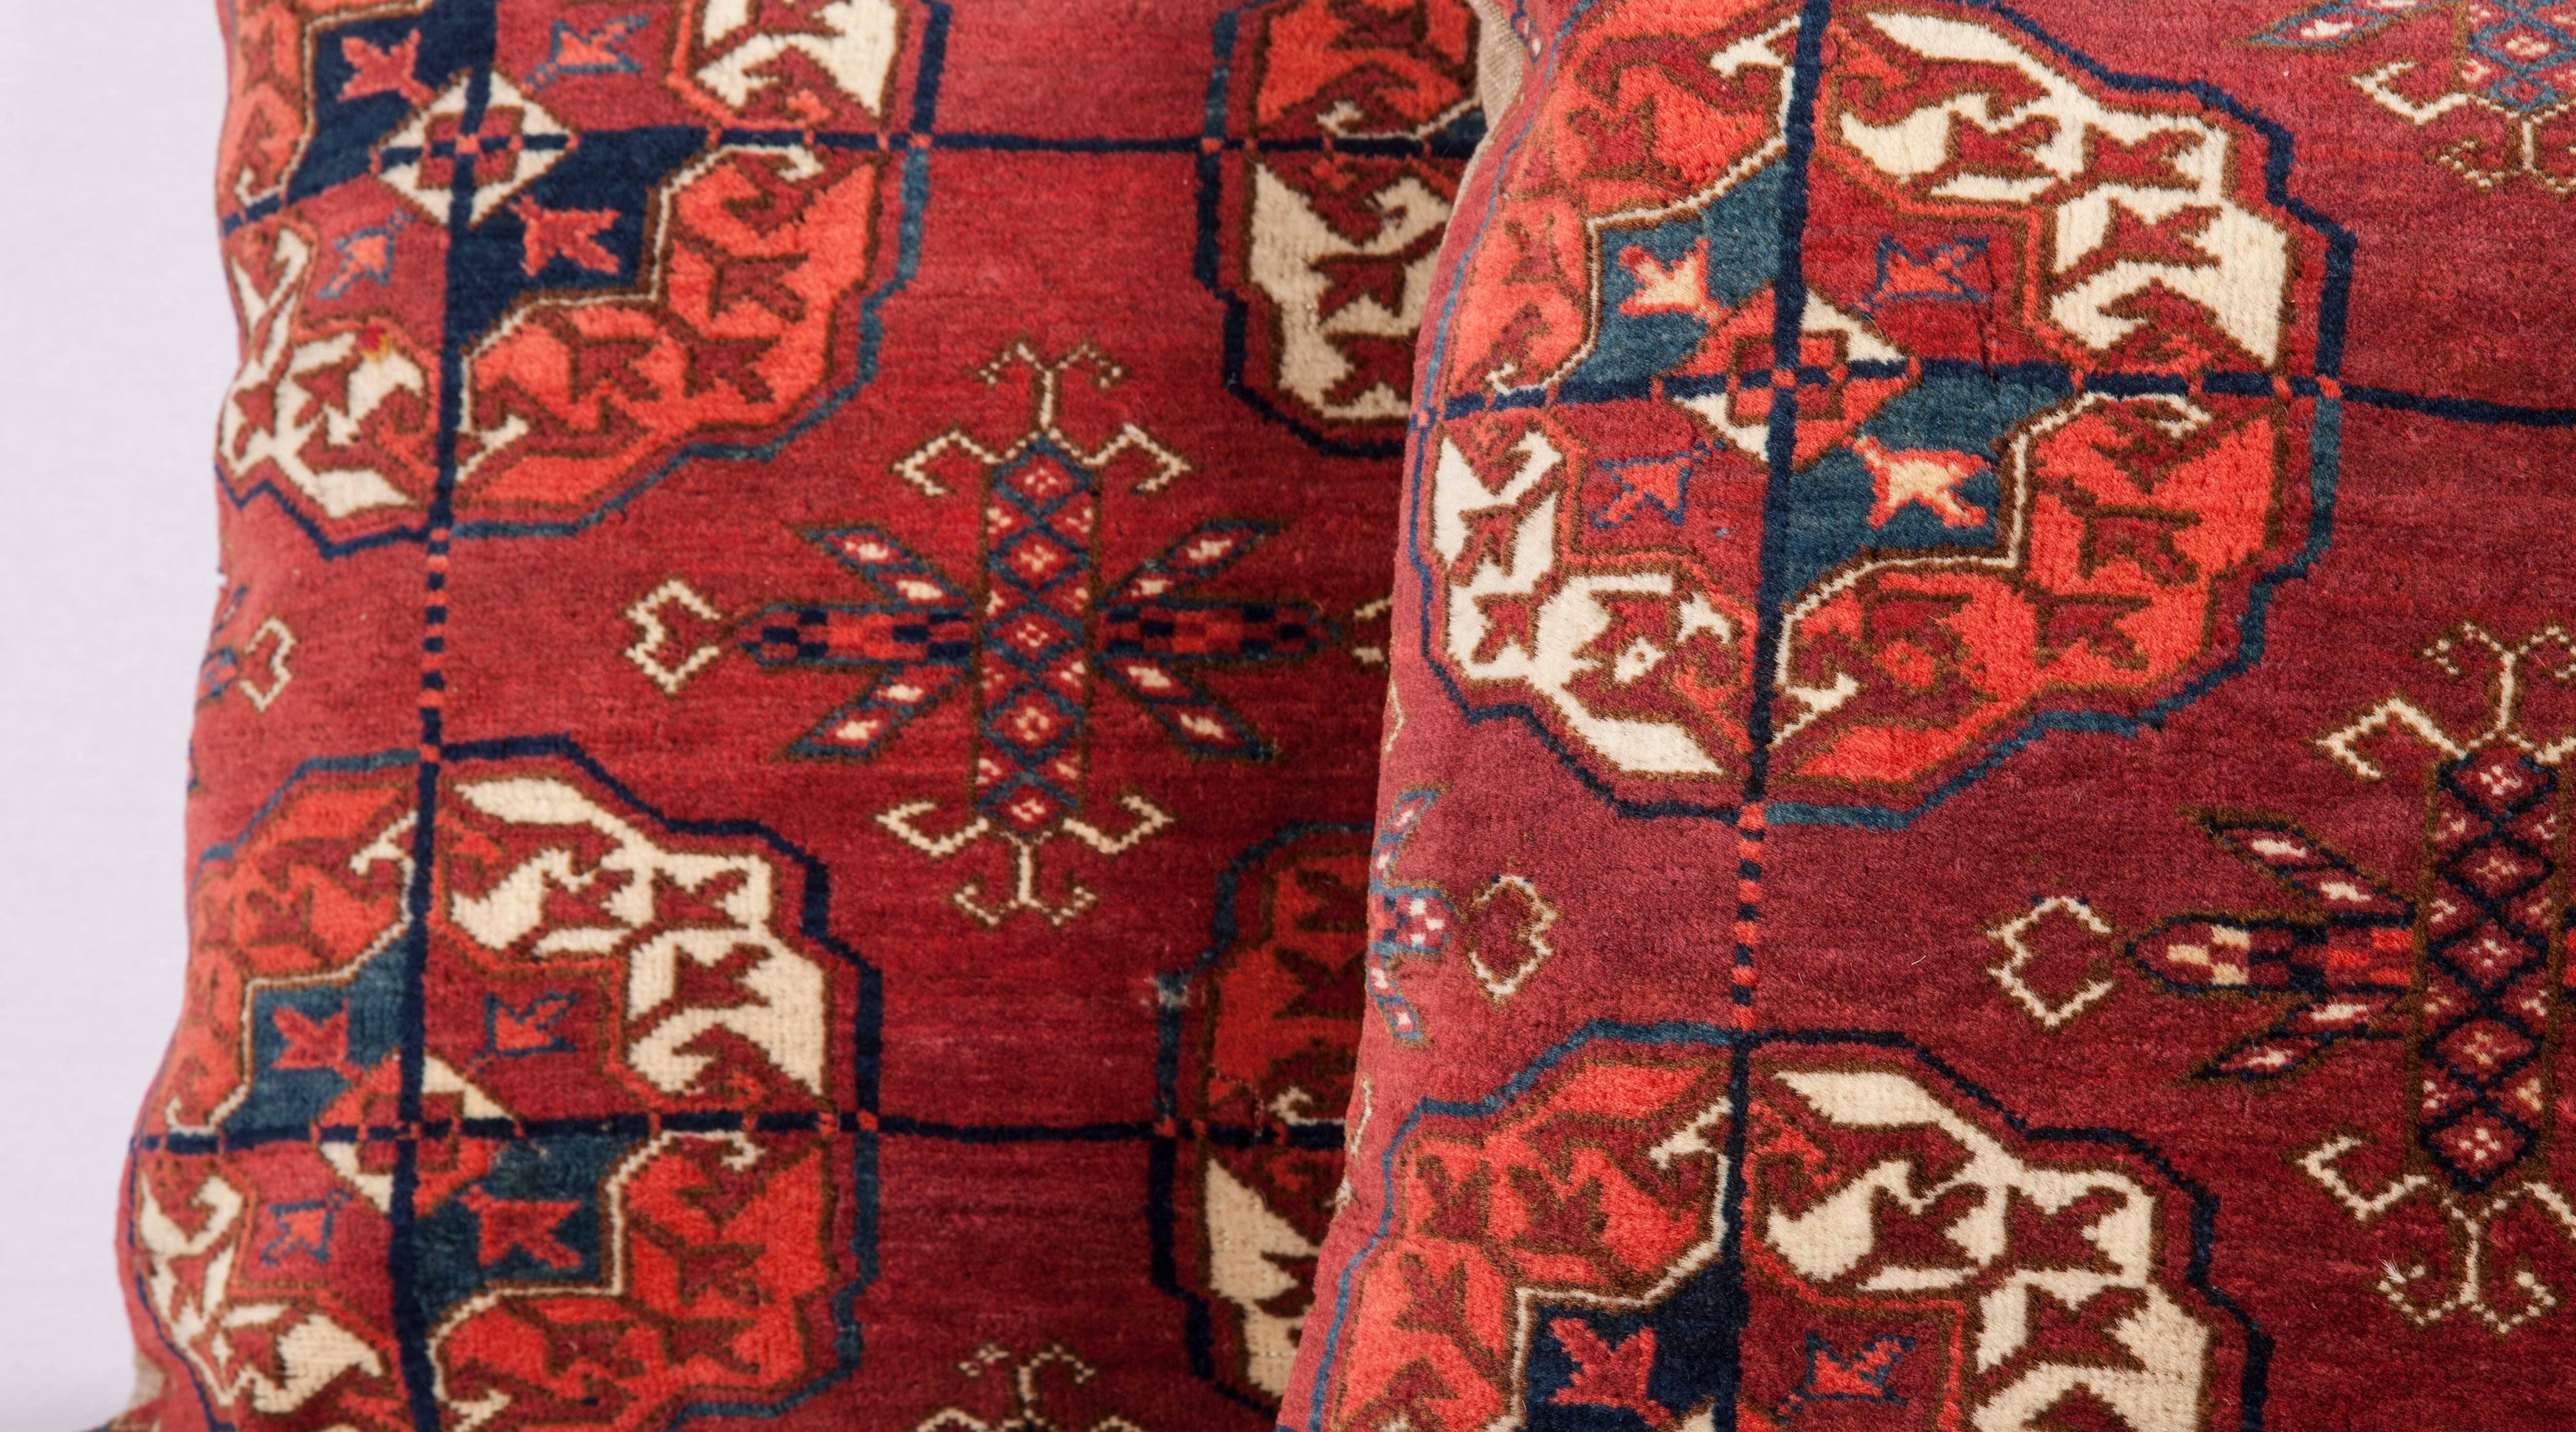 The pillows were made out of a 19th century, Turkmen Tekke tribe main rug fragment. It does not come with an insert but it comes with a bag made to the size and out of cotton to accommodate the filling. The backing is made of linen. Please note